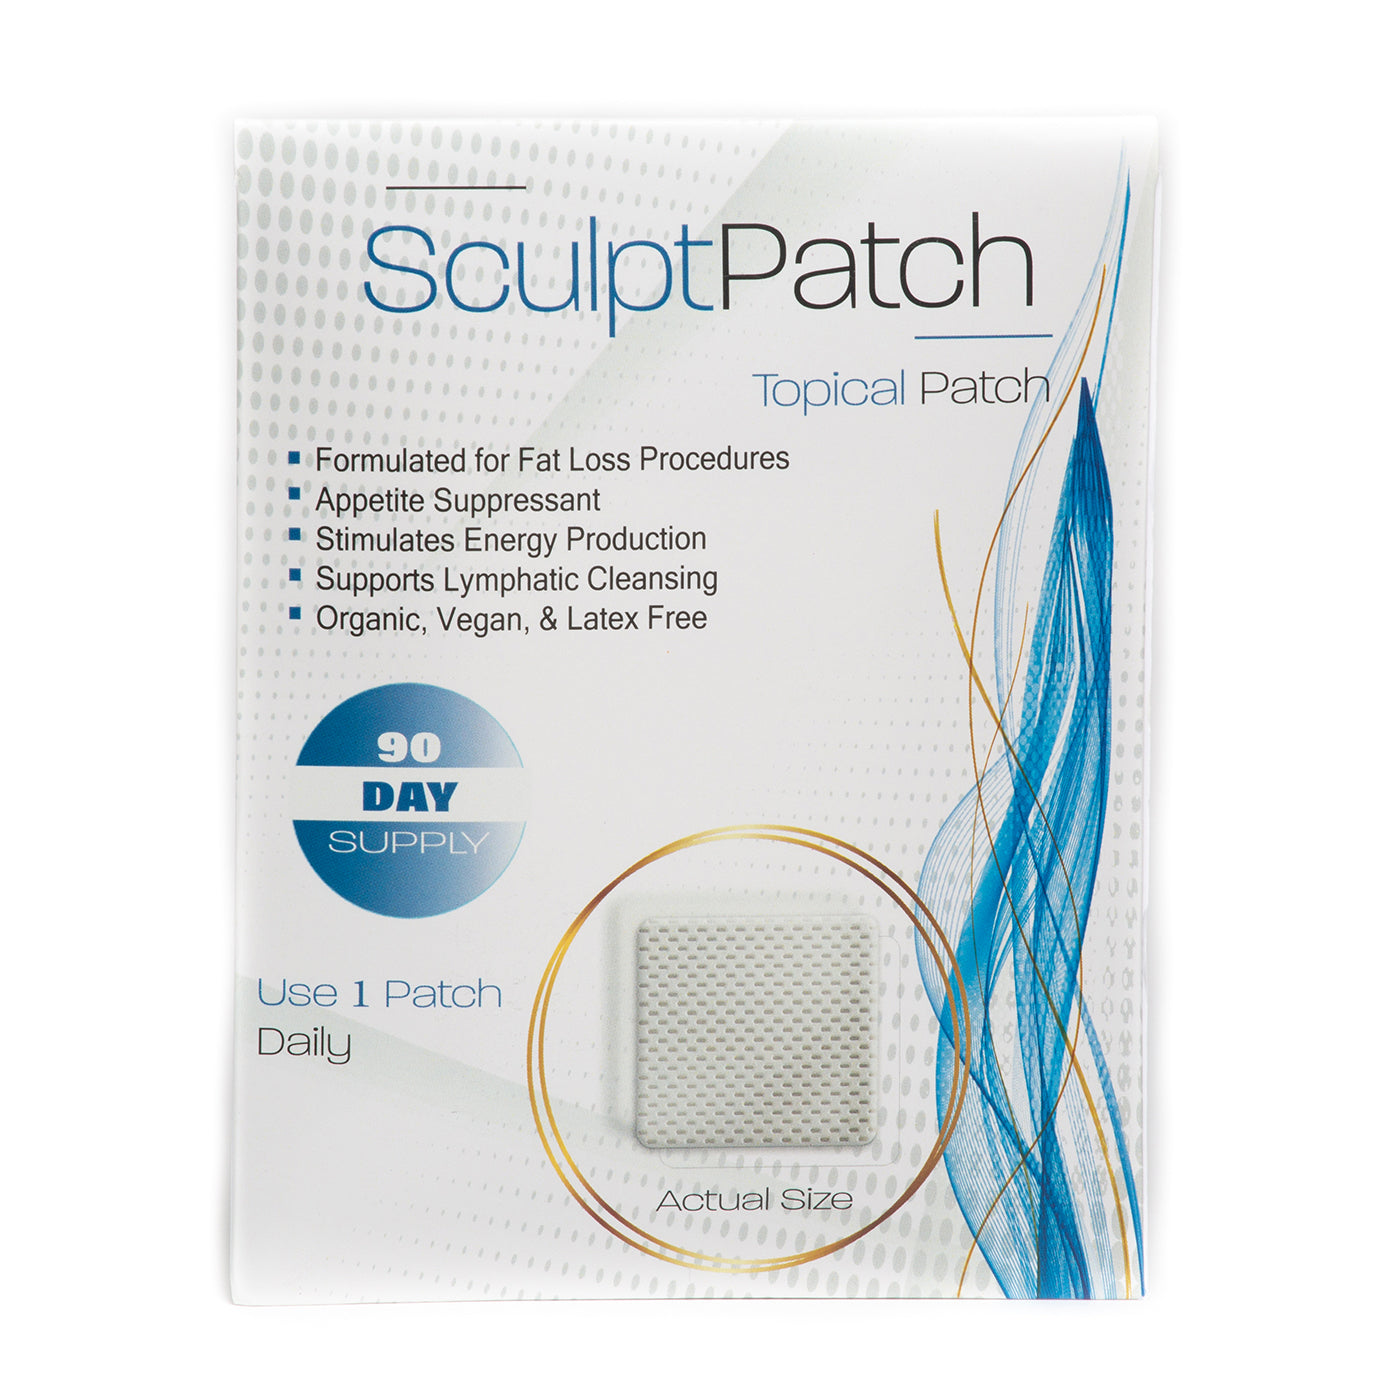 SculptPatch is the latest technology with natural nutrients supporting overall body shaping goals. The blend of ingredients in SculptPatch helps to decrease swelling while cleansing the lymphatic syste